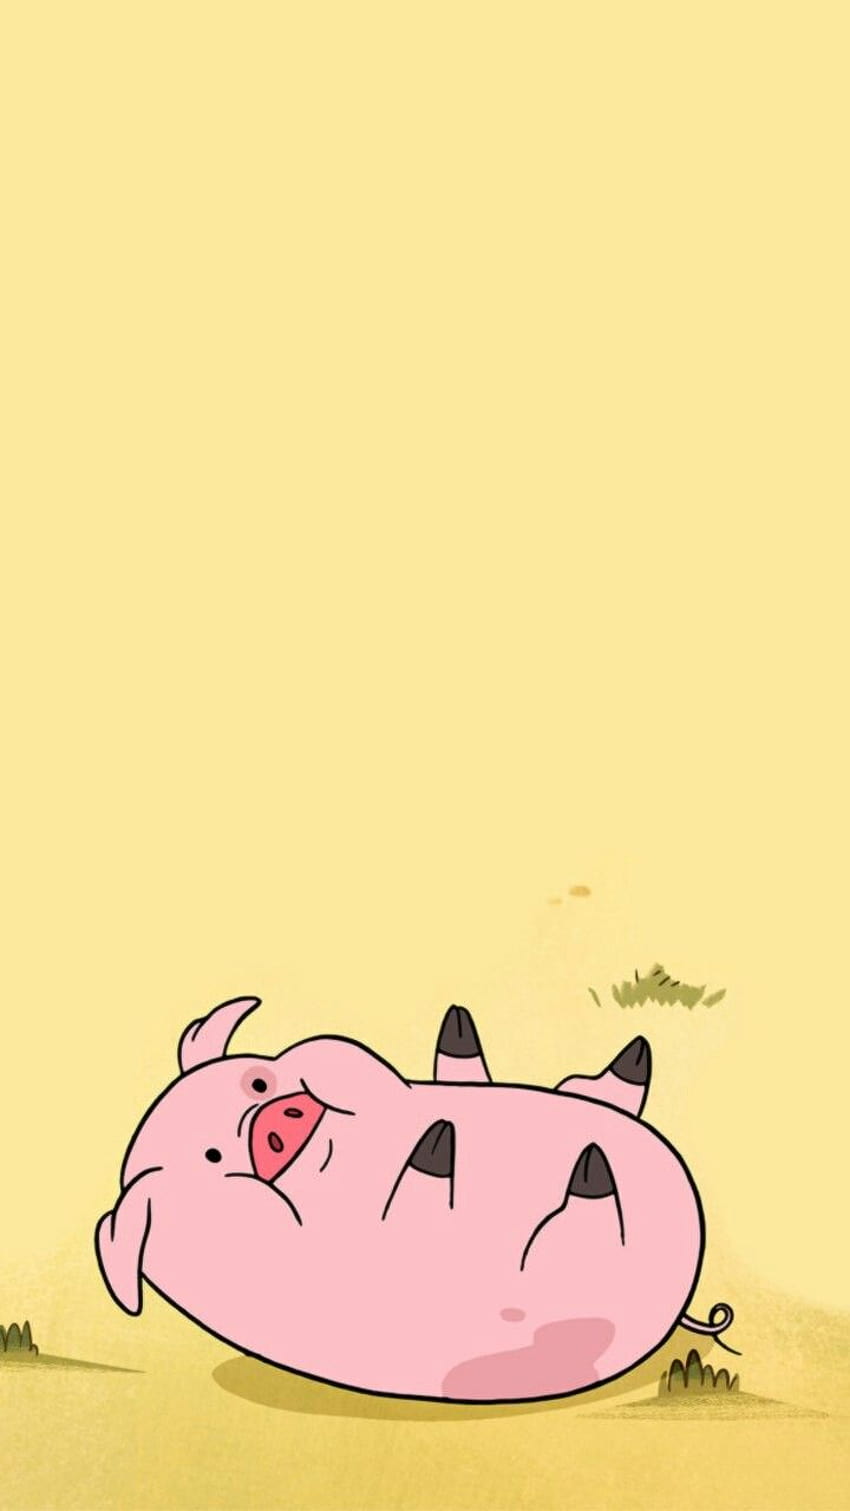 Waddles posted by Ryan Johnson, waddles phone HD phone wallpaper